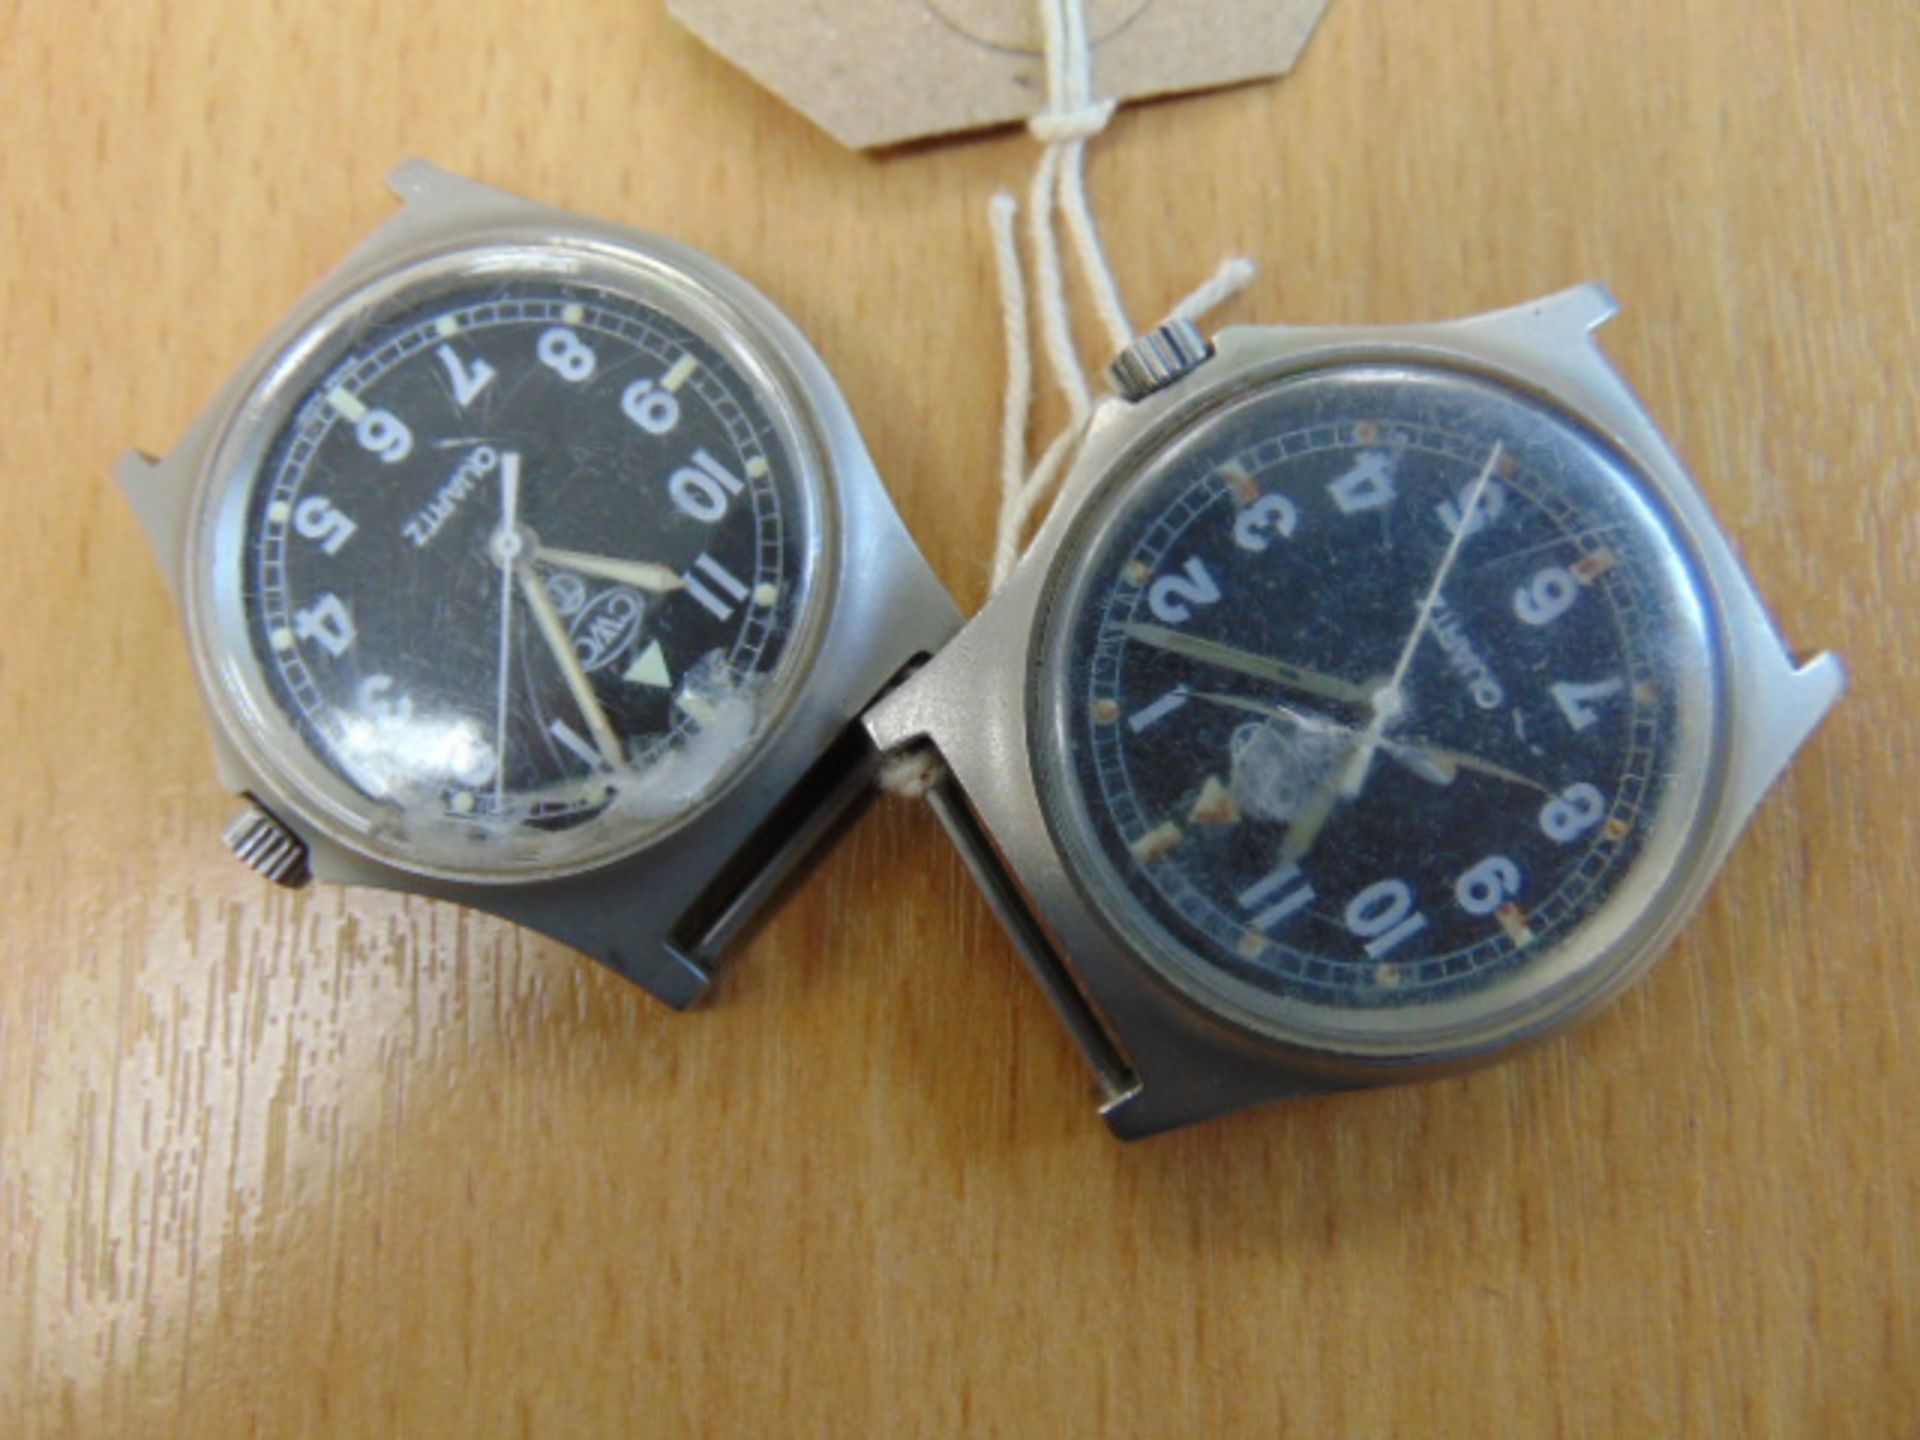 2X W10 CWC SERVICE WATCHES -DAMAGED GLASS DATED 1991 / 1997